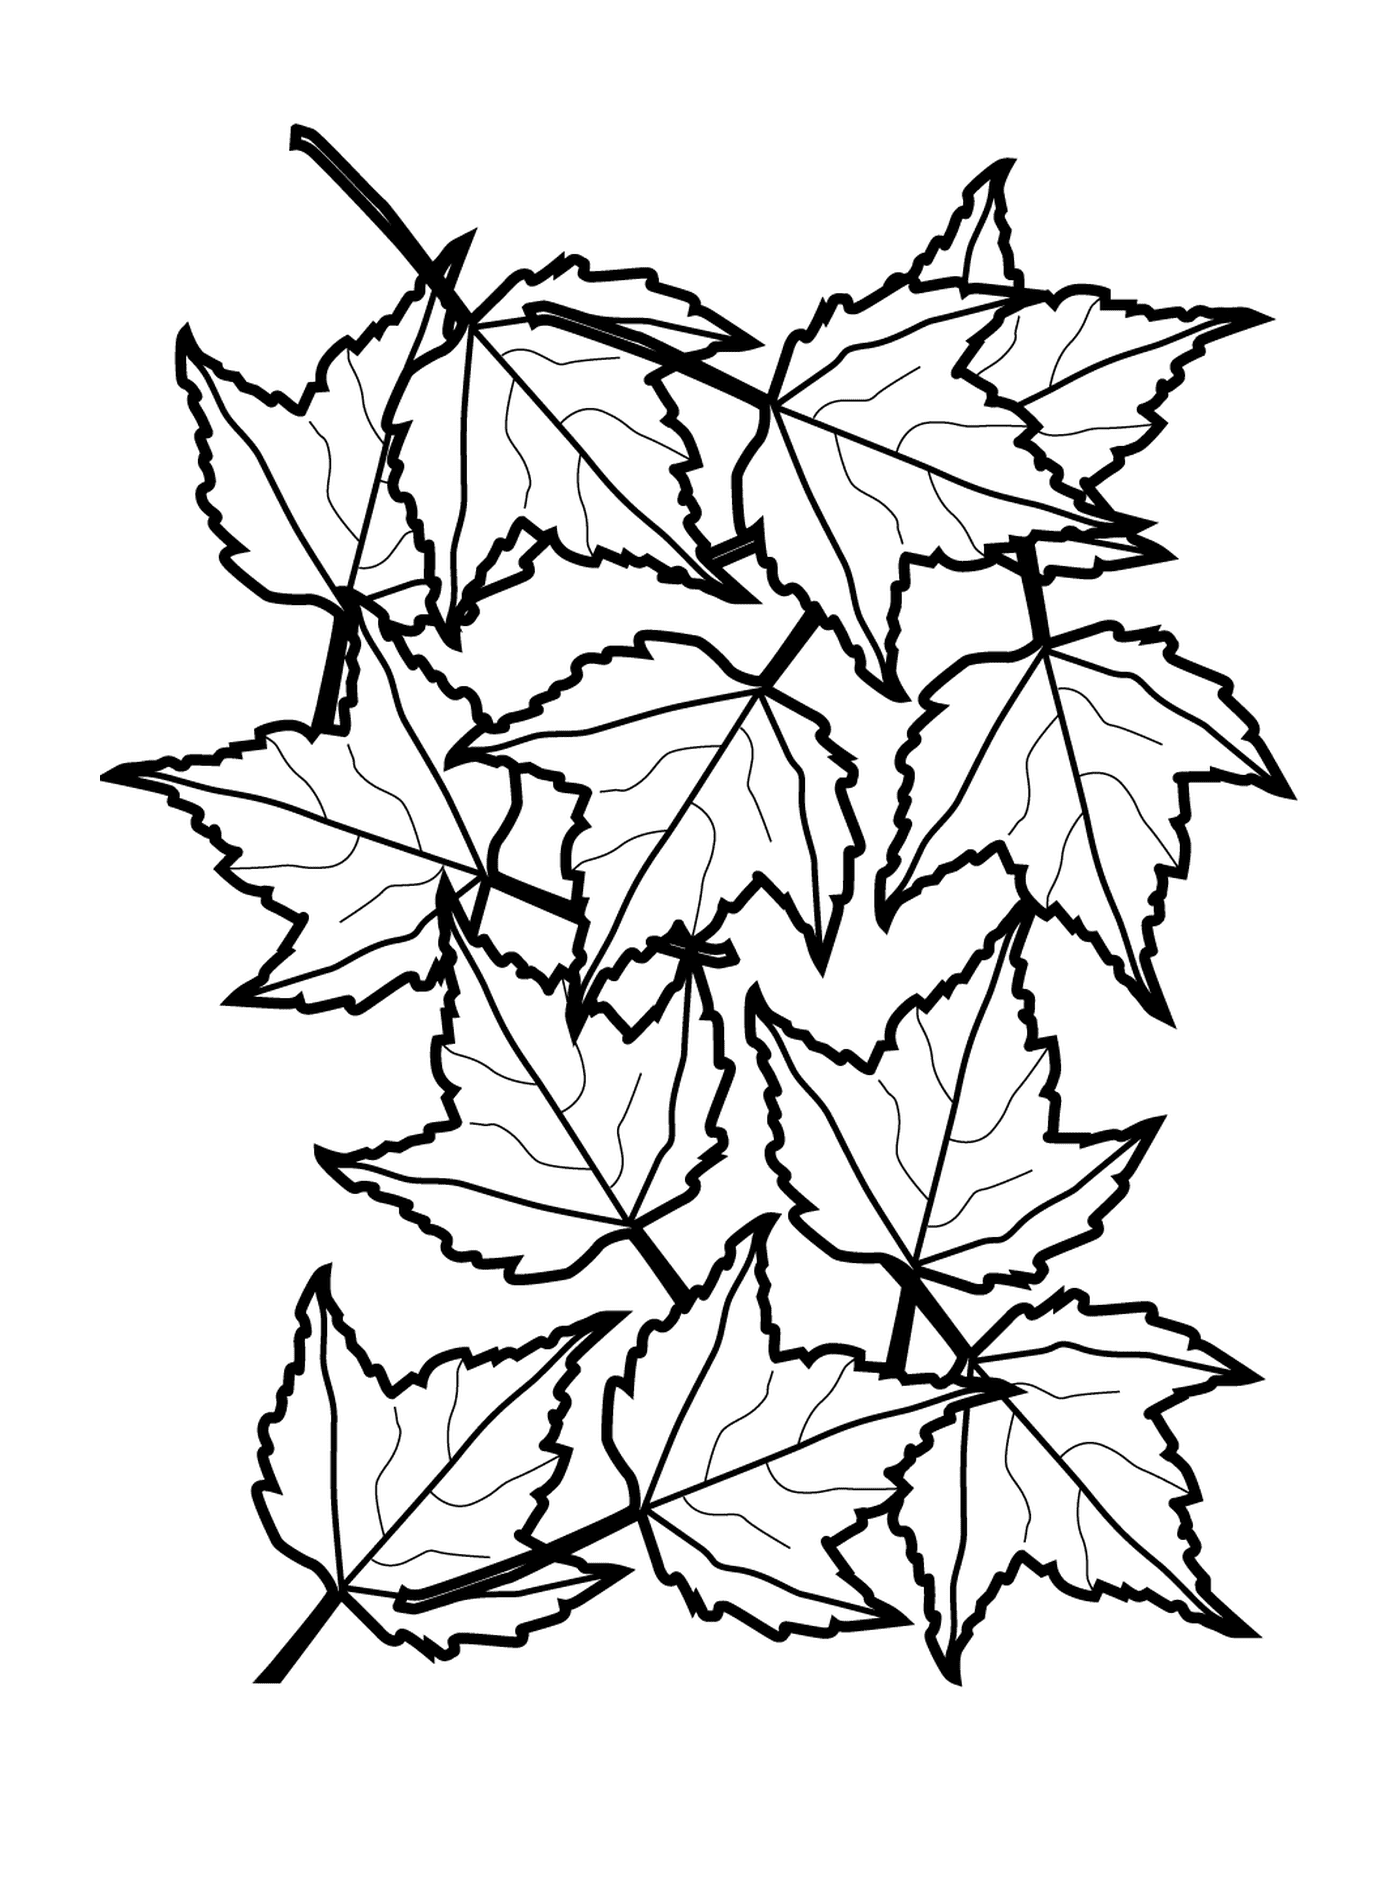  Line of a multitude of autumn leaves 